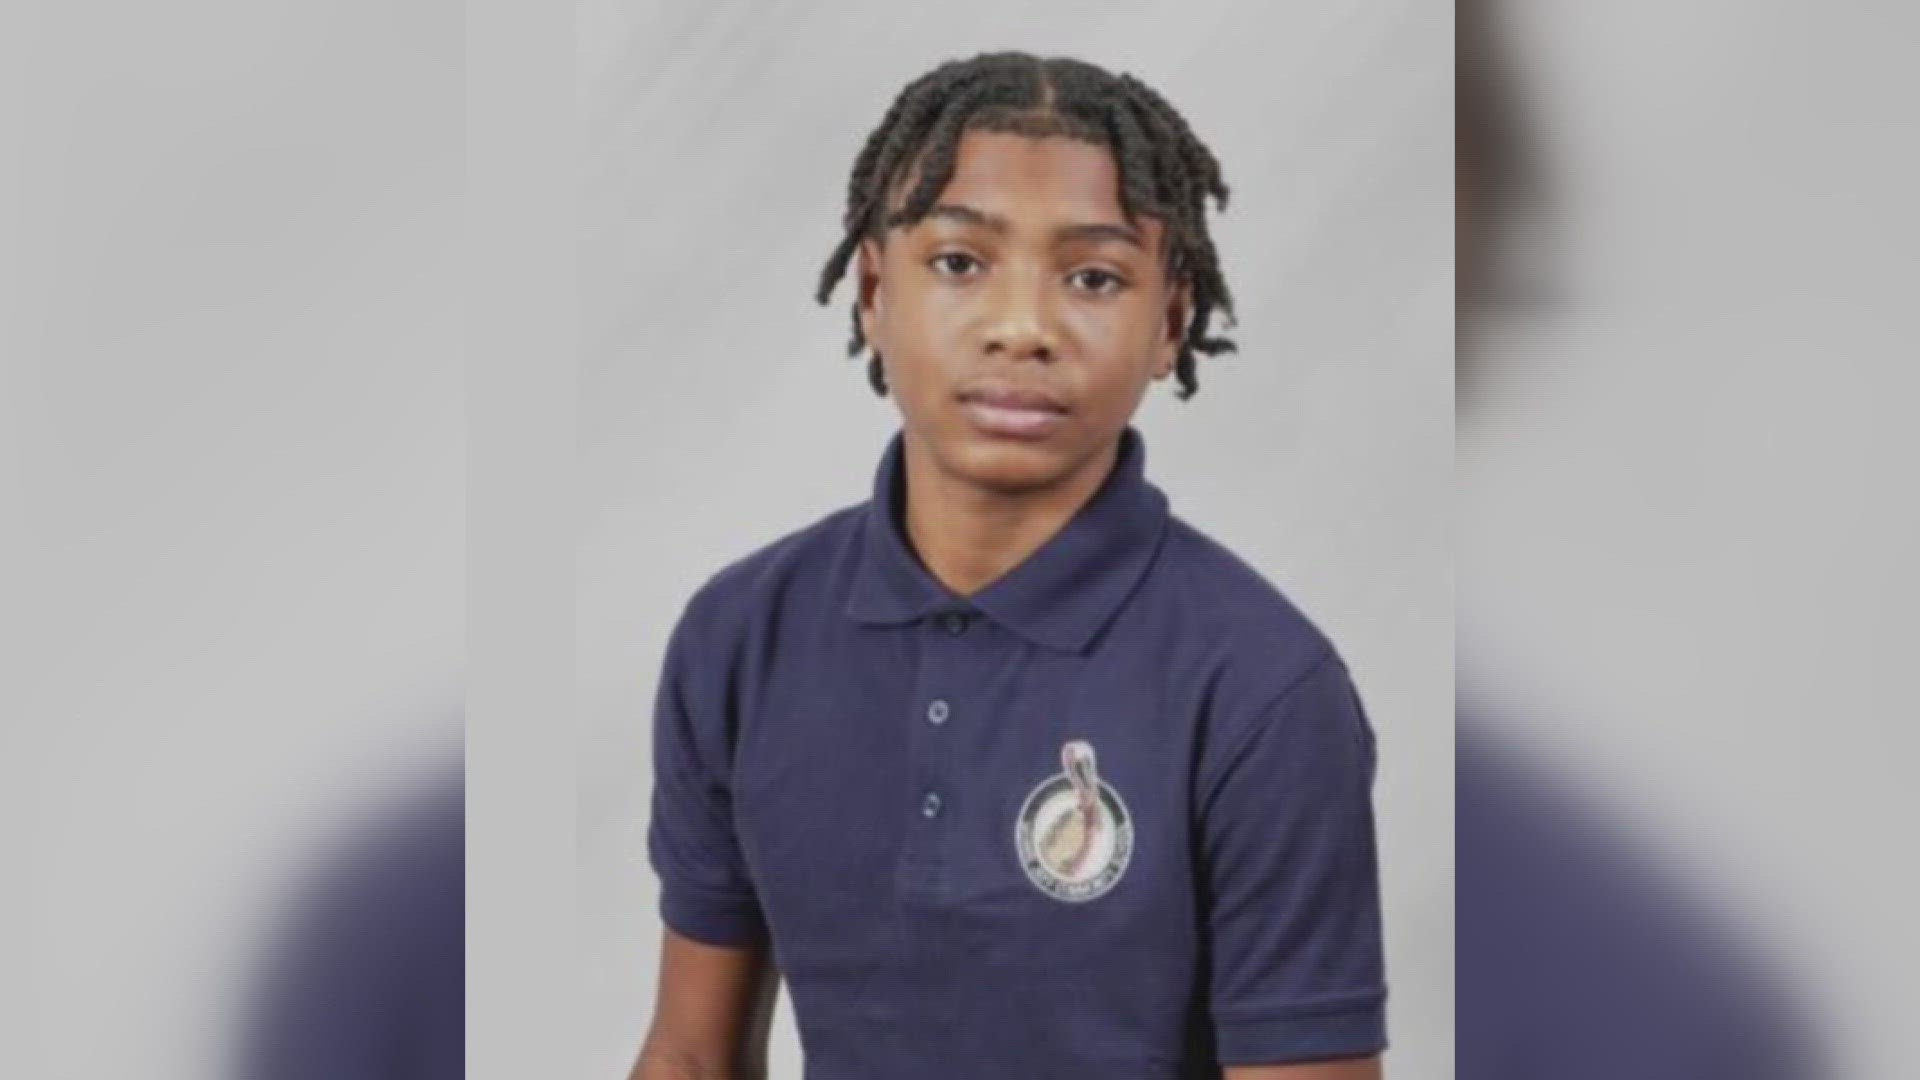 Juelz Brock had just started 8th grade at KIPP Central School last week and was gunned down in New Orleans East Sunday.